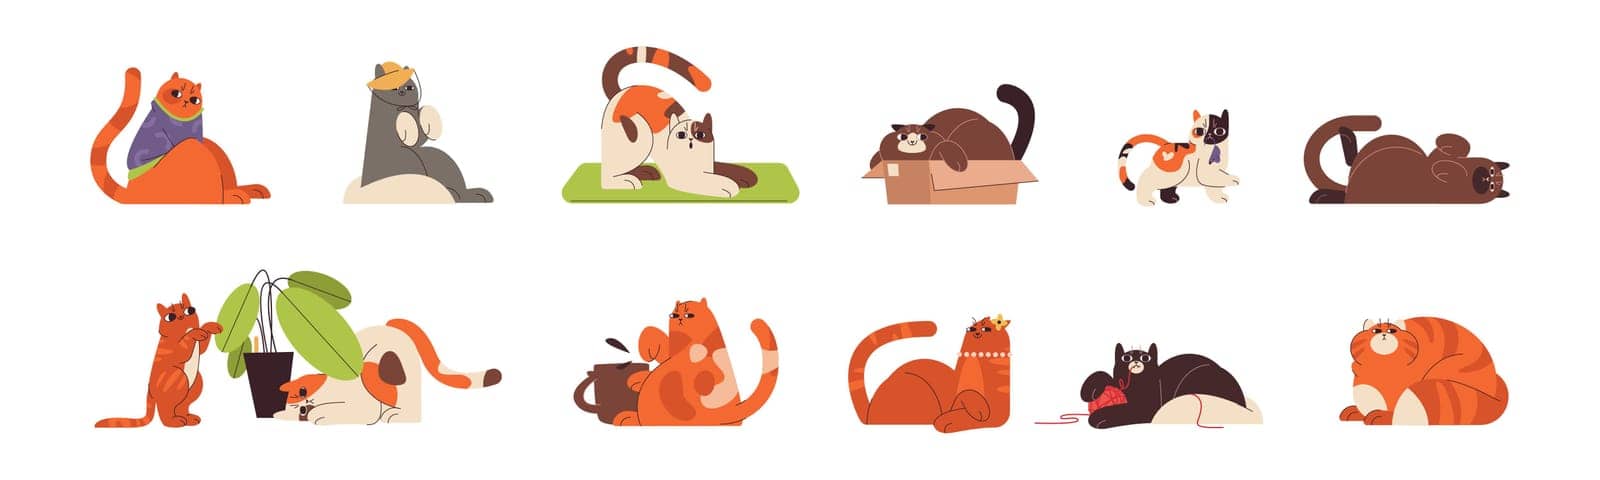 Flat cute ginger cats and kitty in different funny poses. Playful happy domestic feline animals doing yoga, playing with ball, hiding in box and liying. Fat lazy fluffy pets sitting in sweater and hat